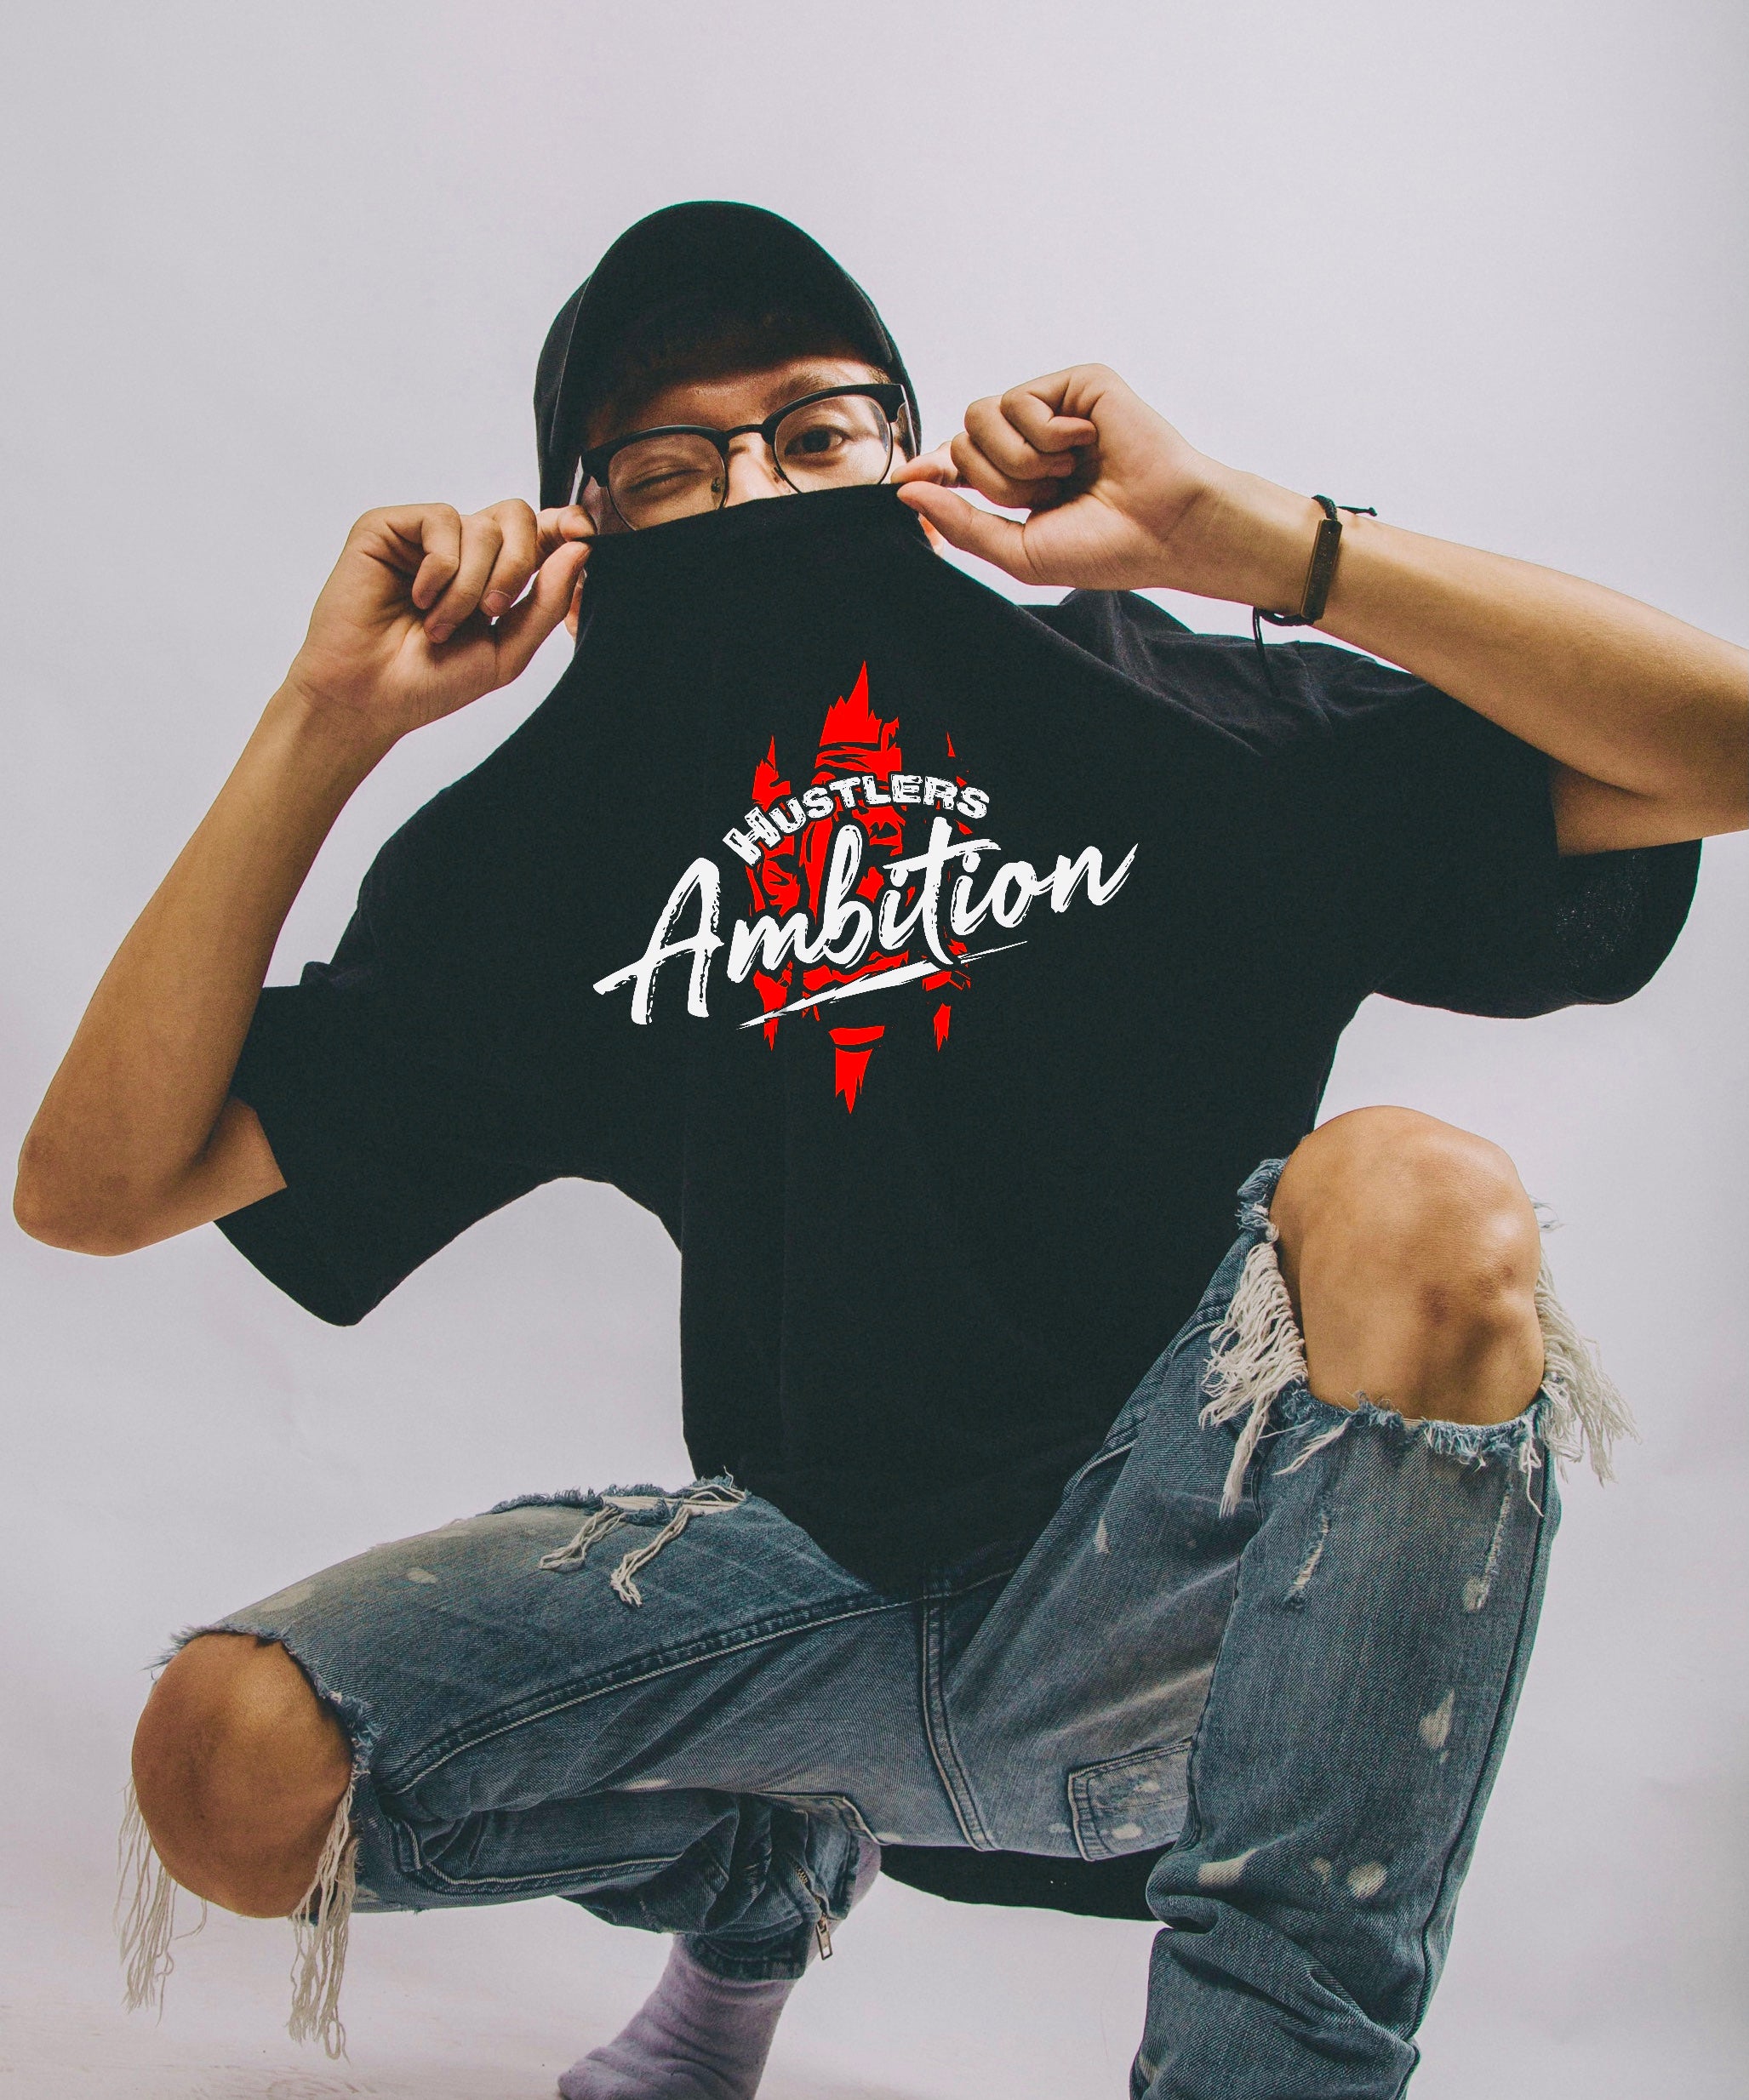 A closer look at our Hustlers Ambition collection